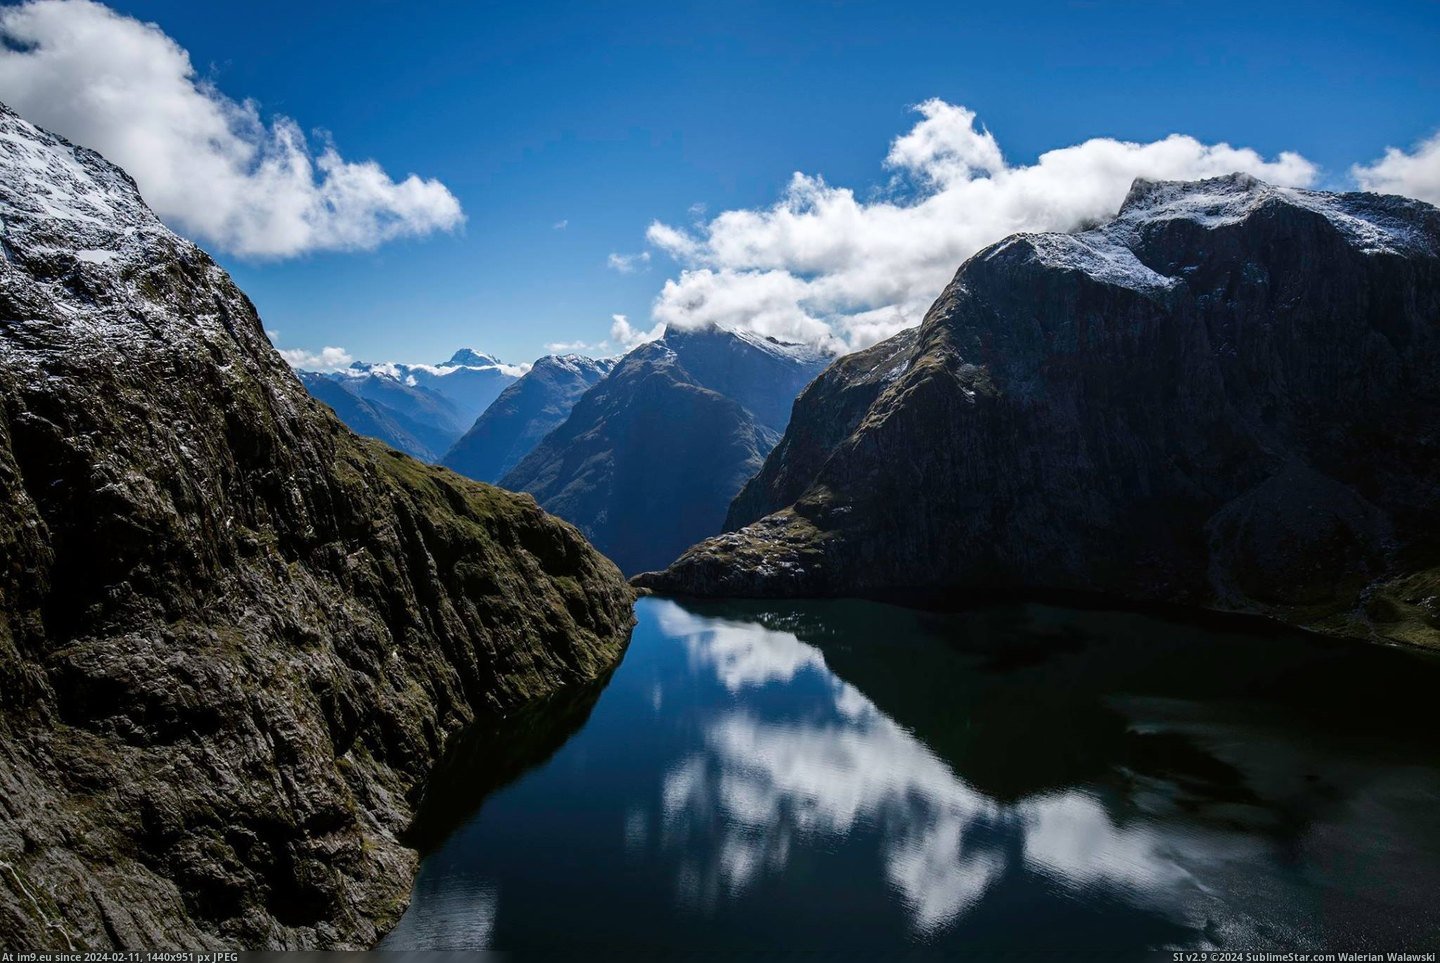 #High #Park #National #2048x1365 #Fiordland #Lake #Mountains #Zealand [Earthporn] Lake Quill, high up in the mountains of Fiordland National Park, New Zealand [2048x1365] Pic. (Bild von album My r/EARTHPORN favs))